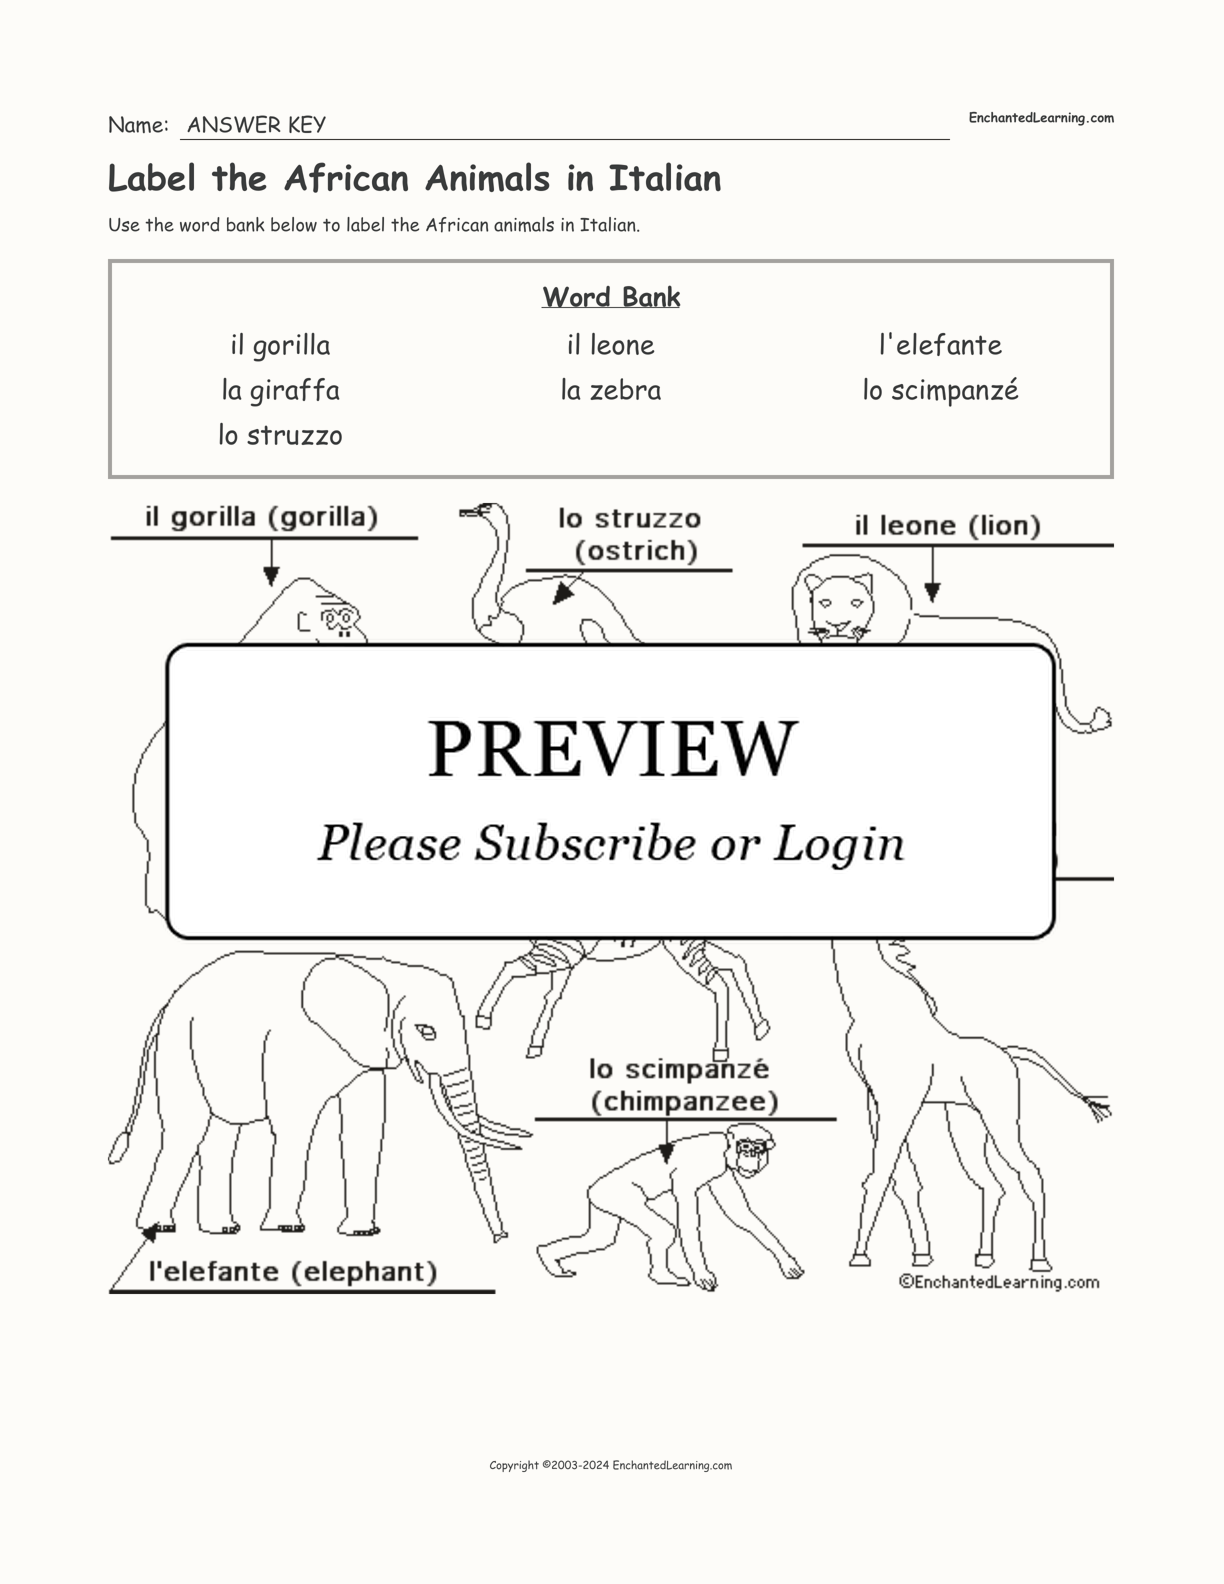 Label the African Animals in Italian interactive worksheet page 2